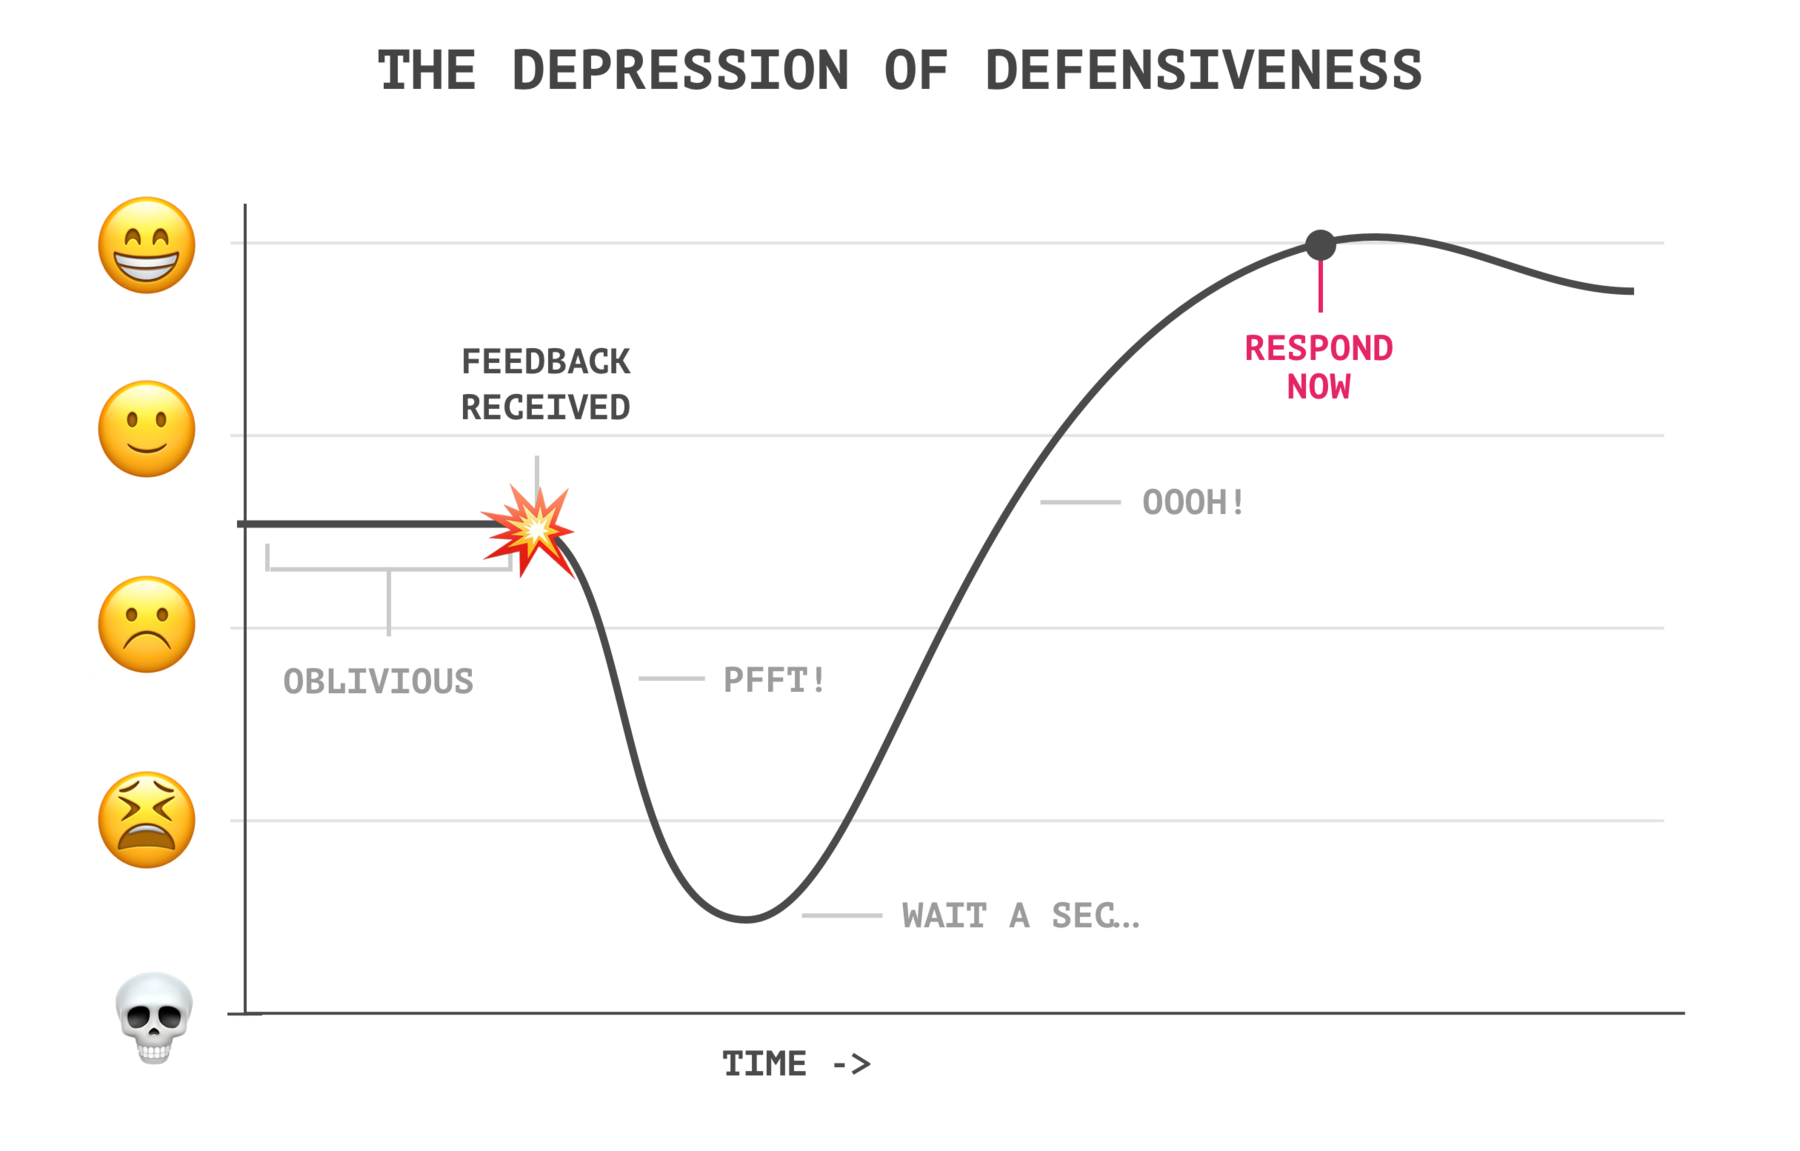 THE DEPRESSION OF DEFENSIVENESS chart with point labelled to respond